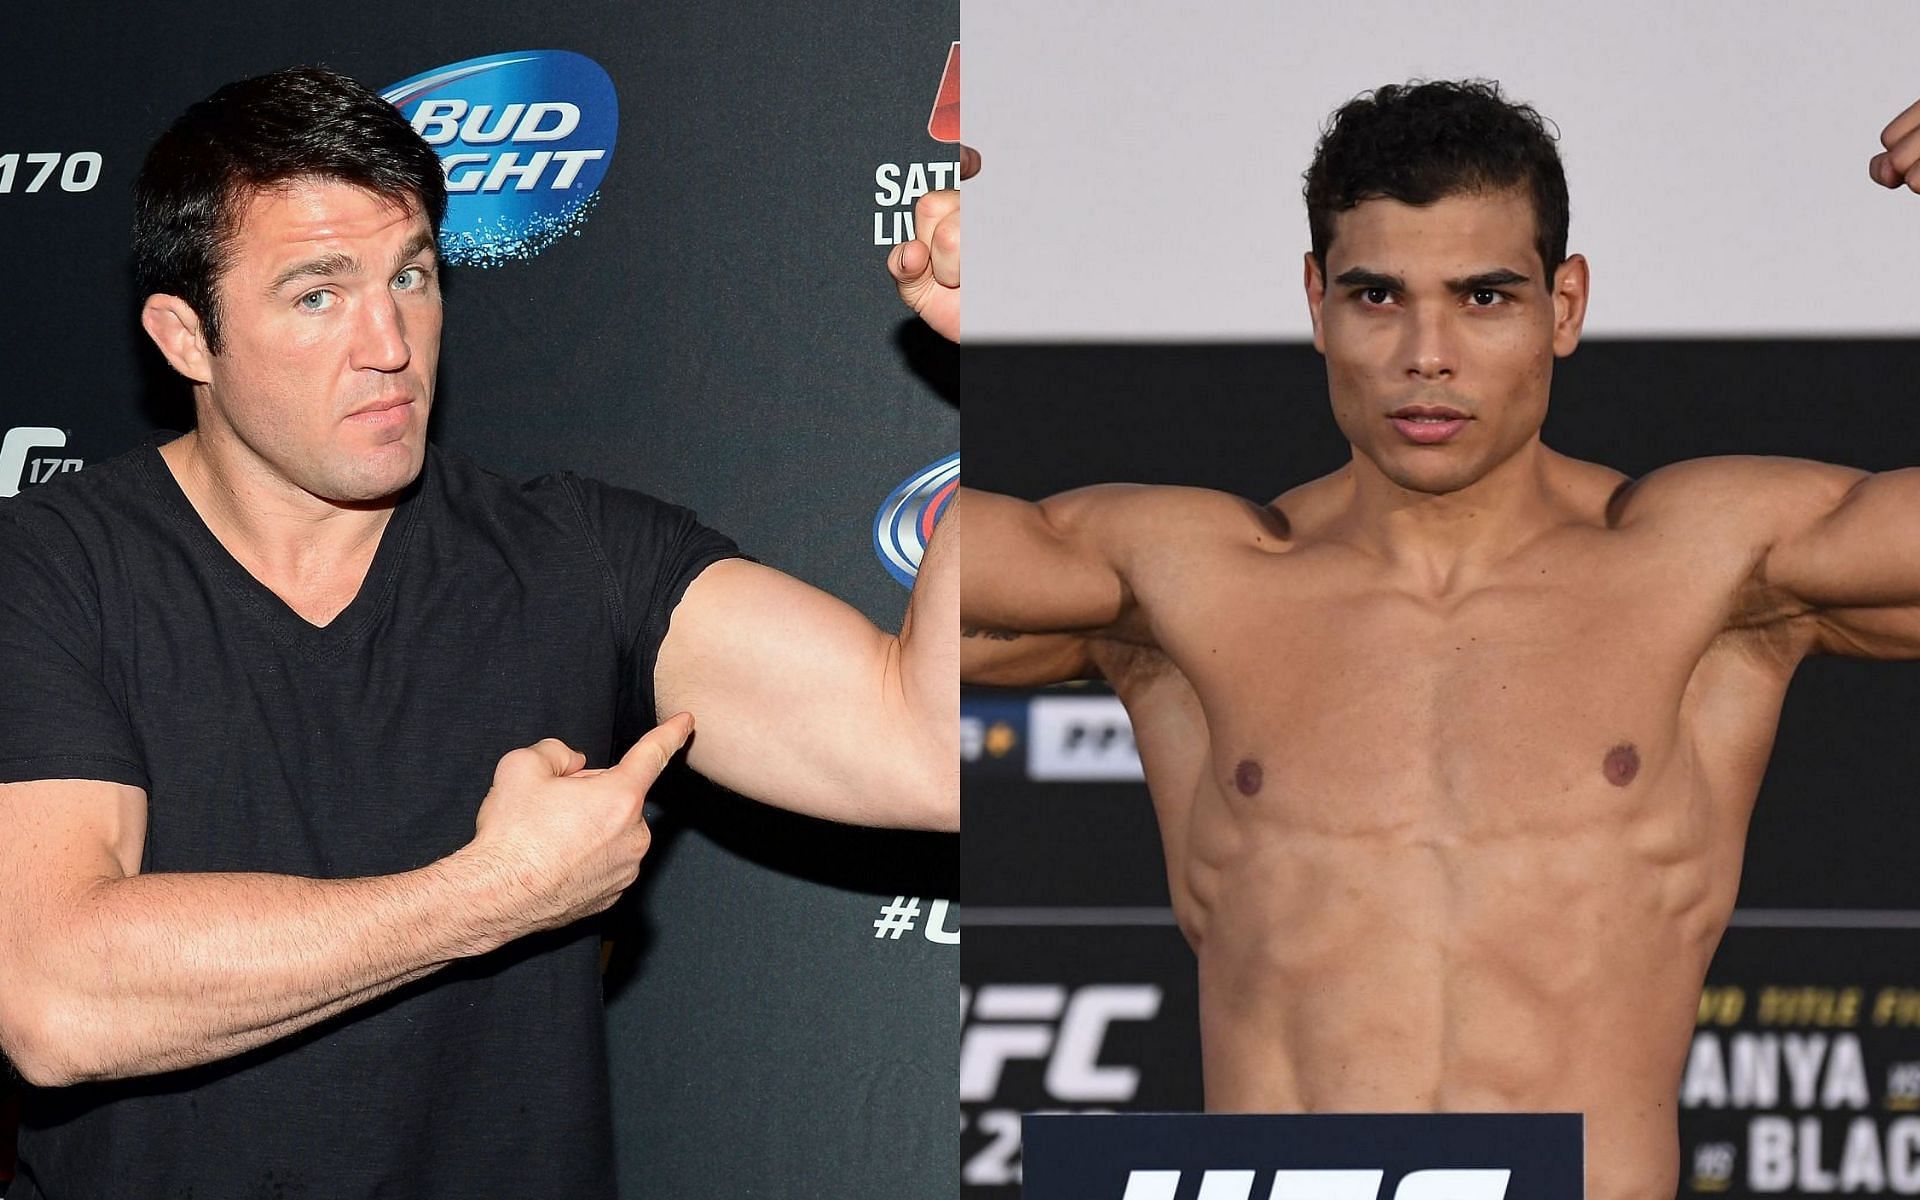 Chael Sonnen has explained how a move to light heavyweight could help extend the career of Paulo Costa